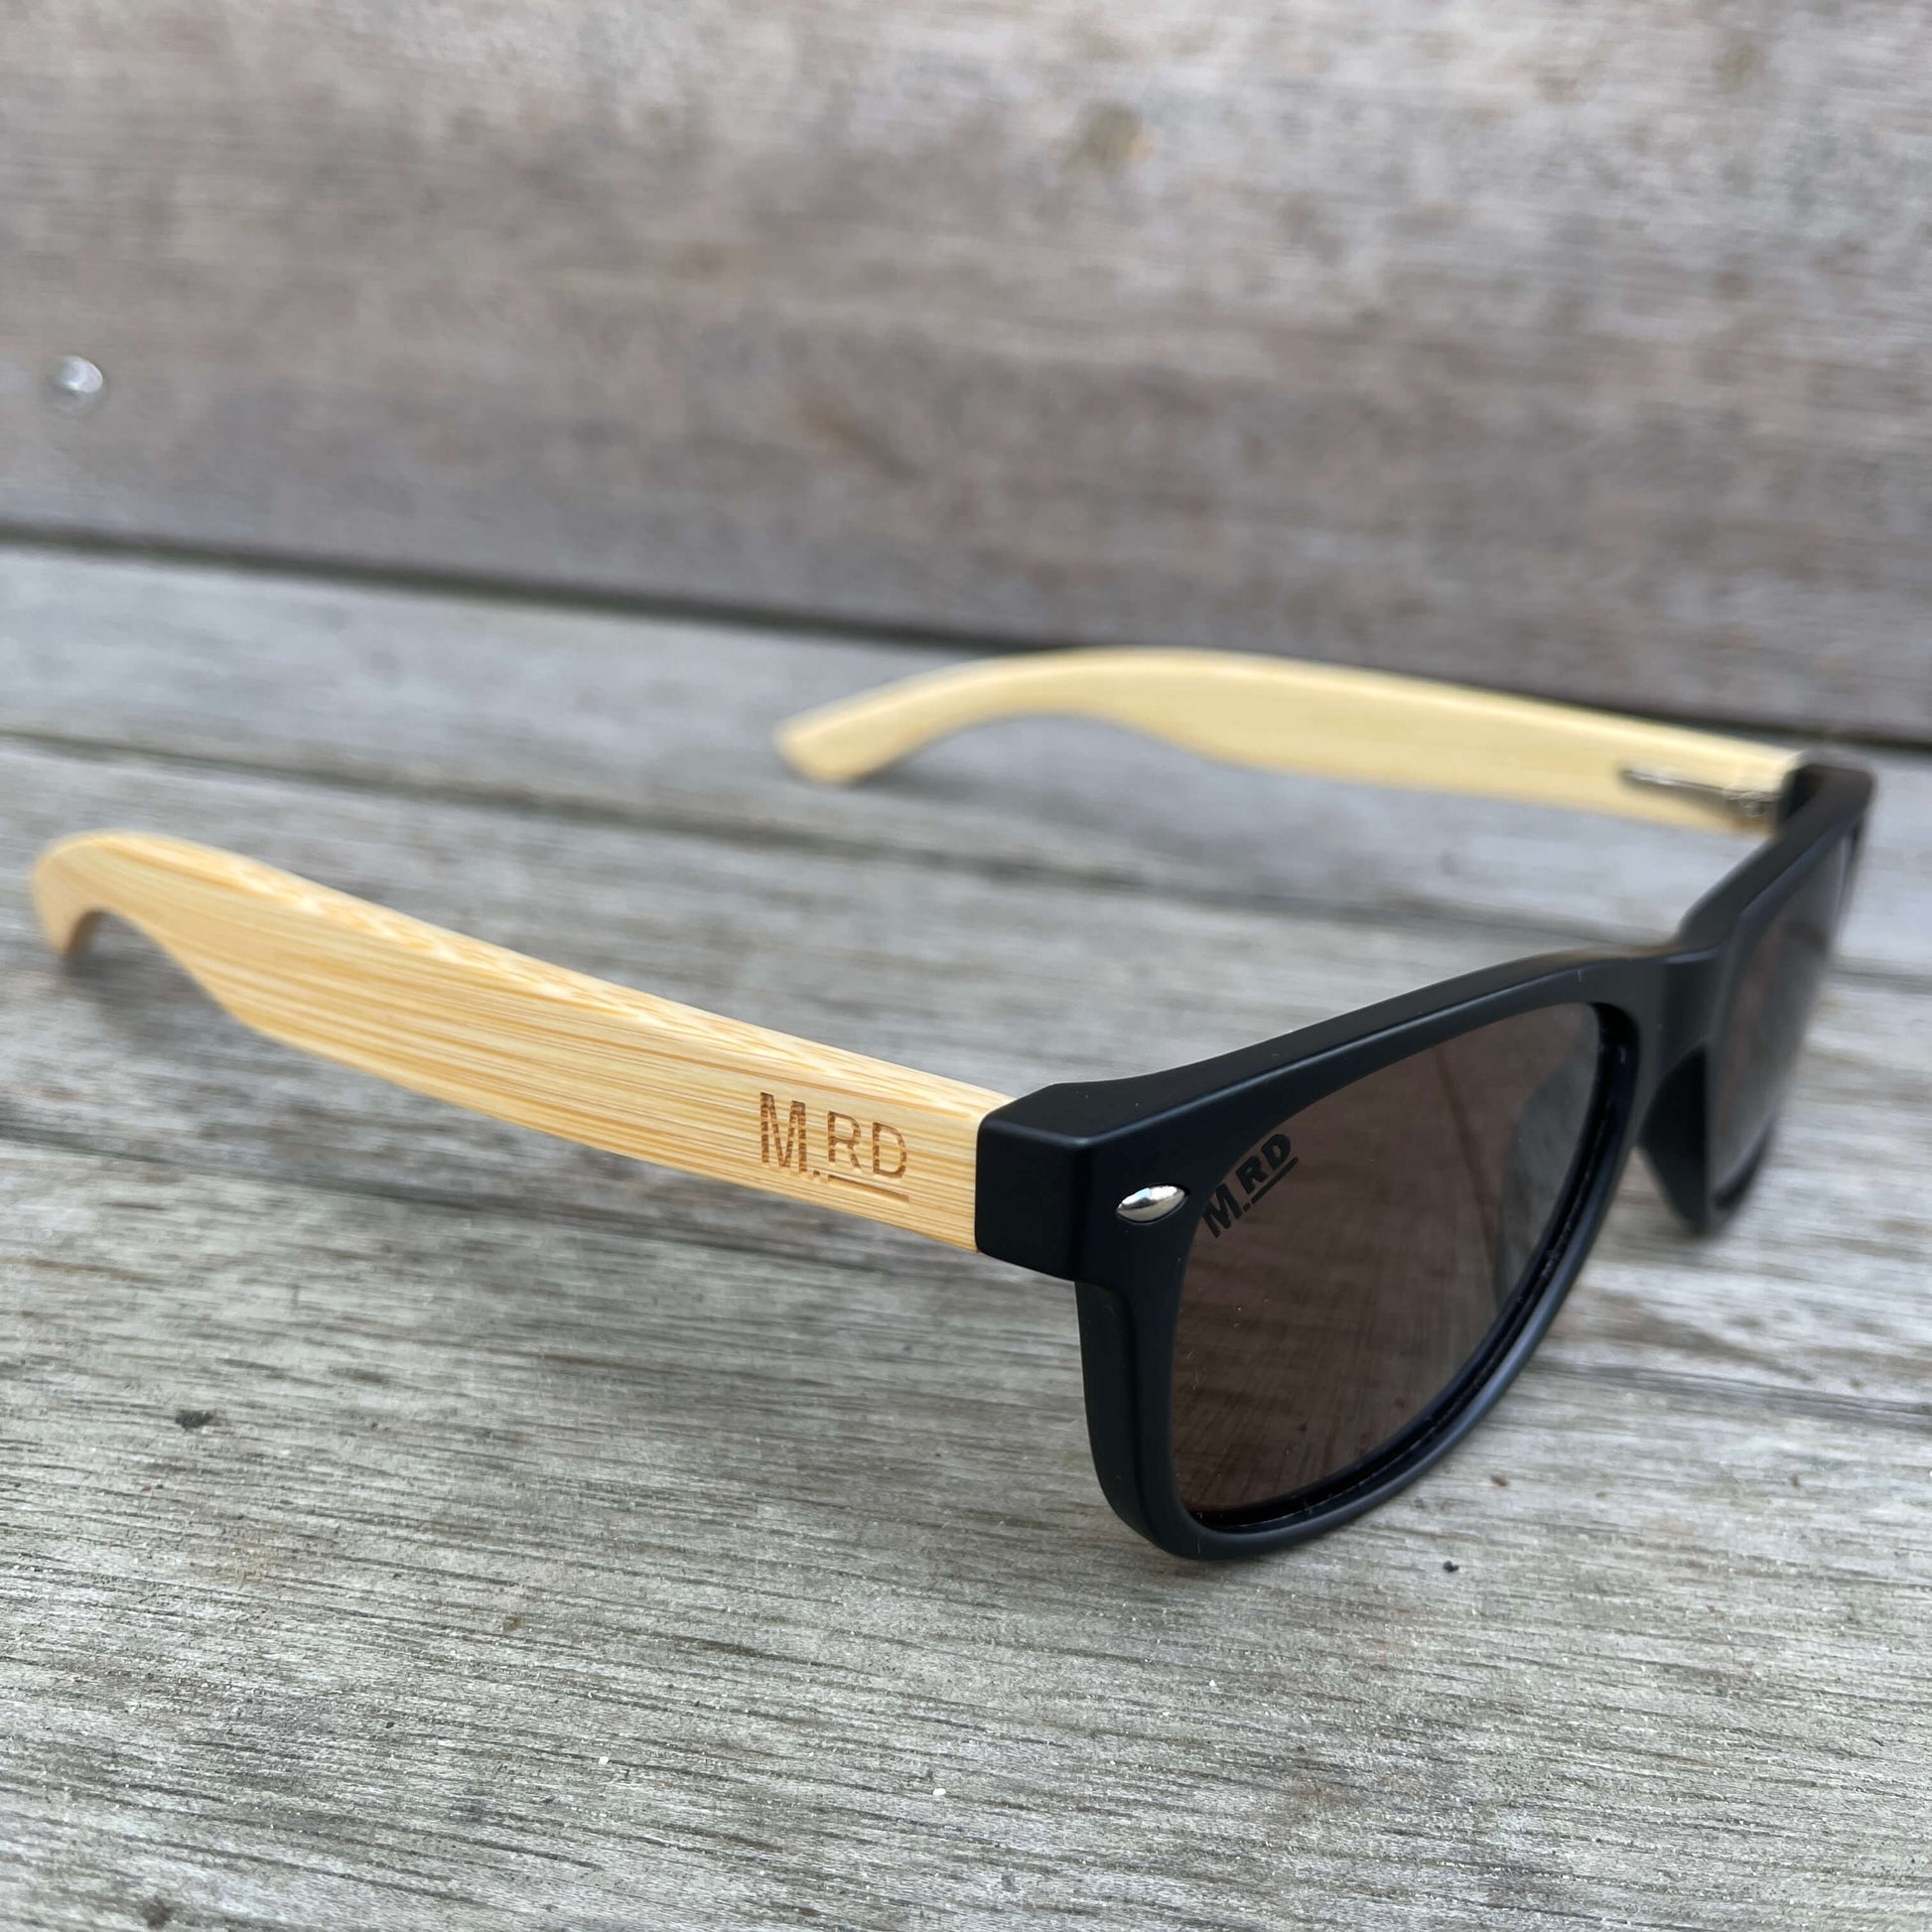 Kids sunglasses with black frame and wood arms.